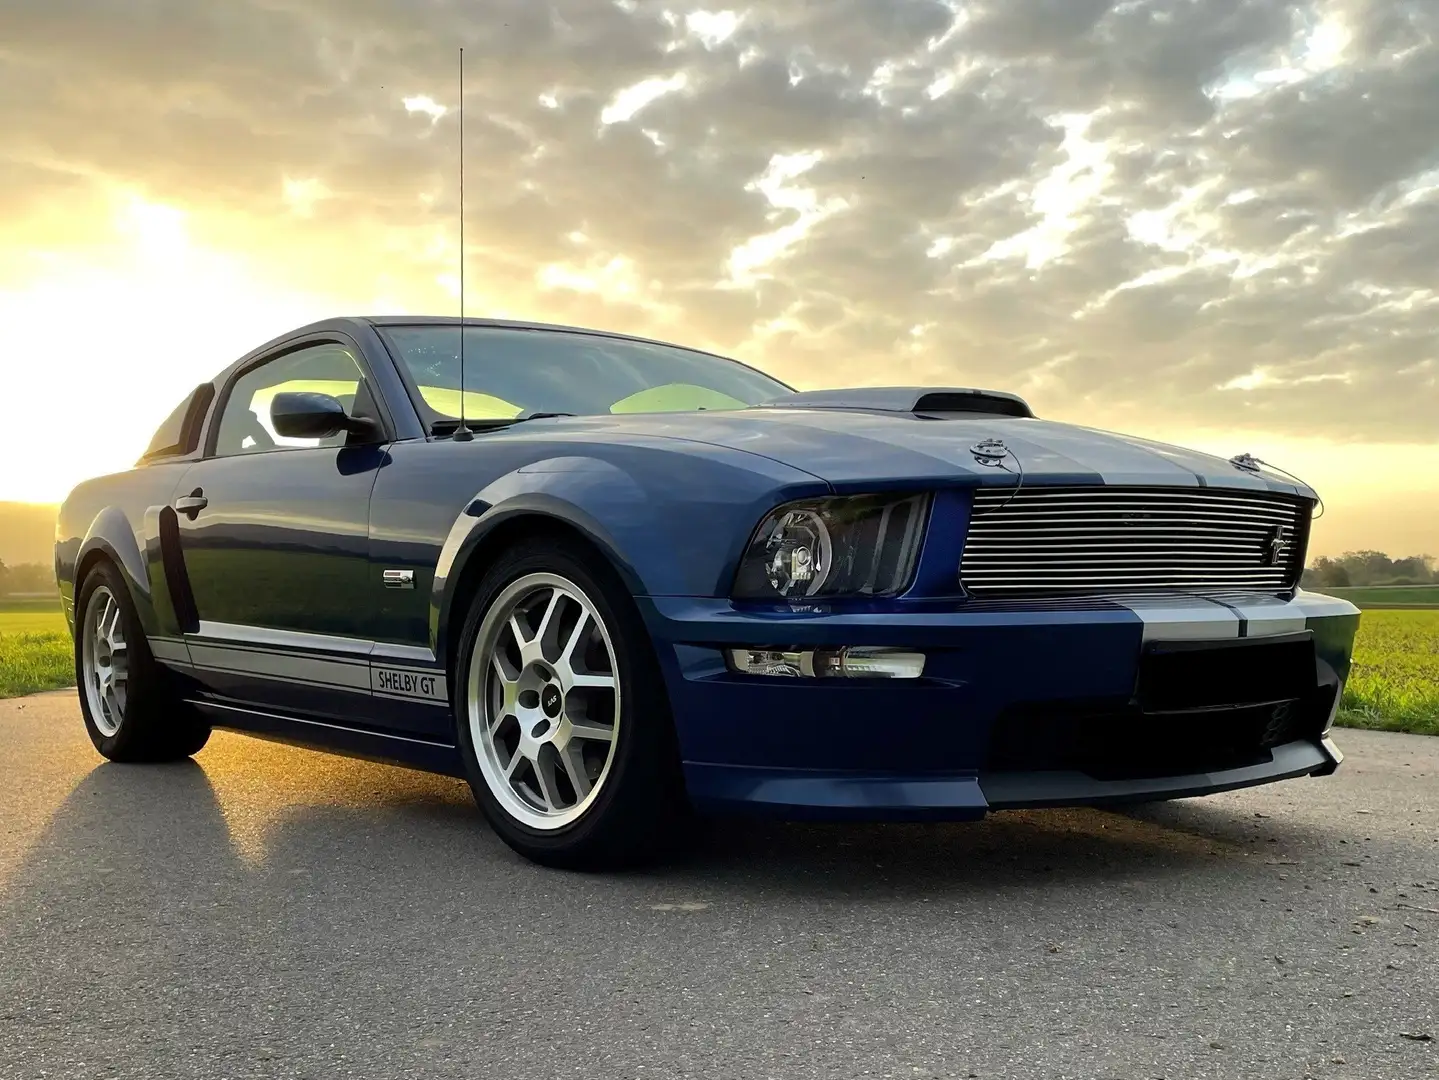 Ford Mustang SHELBY GT          CSM-No. 08SGTxxxx Blauw - 1